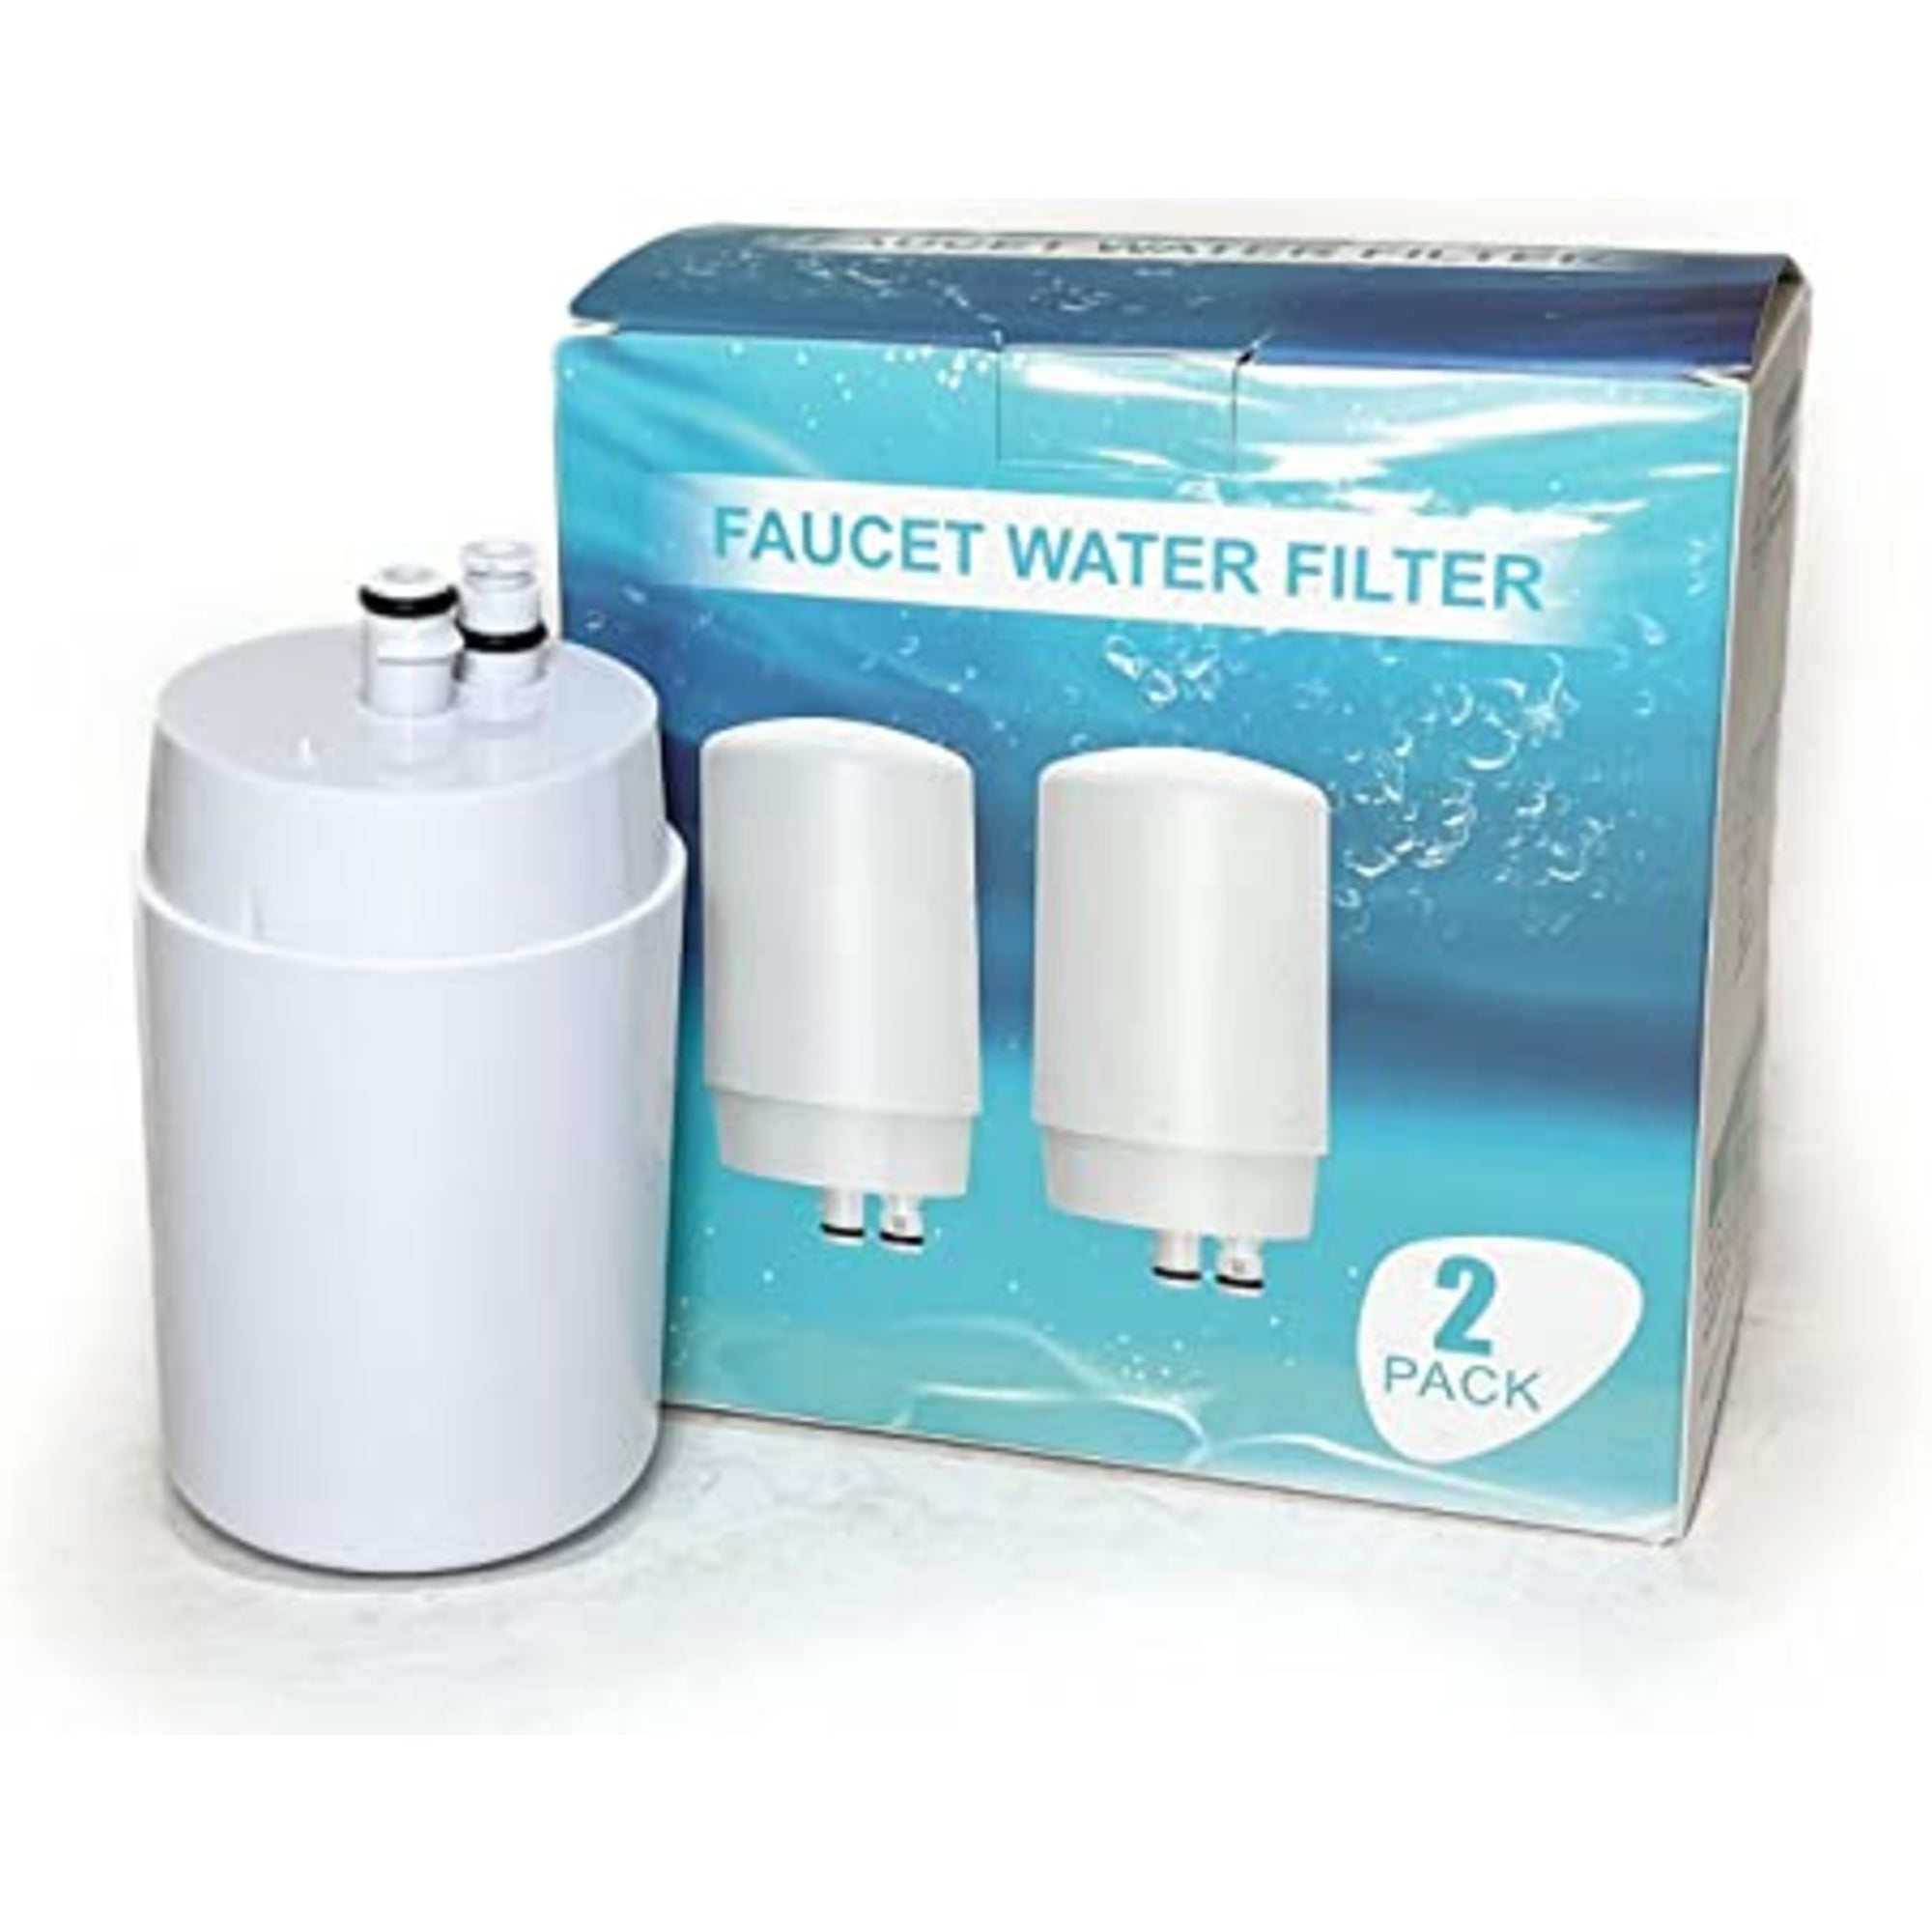 Nispira Water Filter for Brita Basic Complete Faucet Filtration Systems 36311, 36312, FR-200, FF-100, 100 Gallon